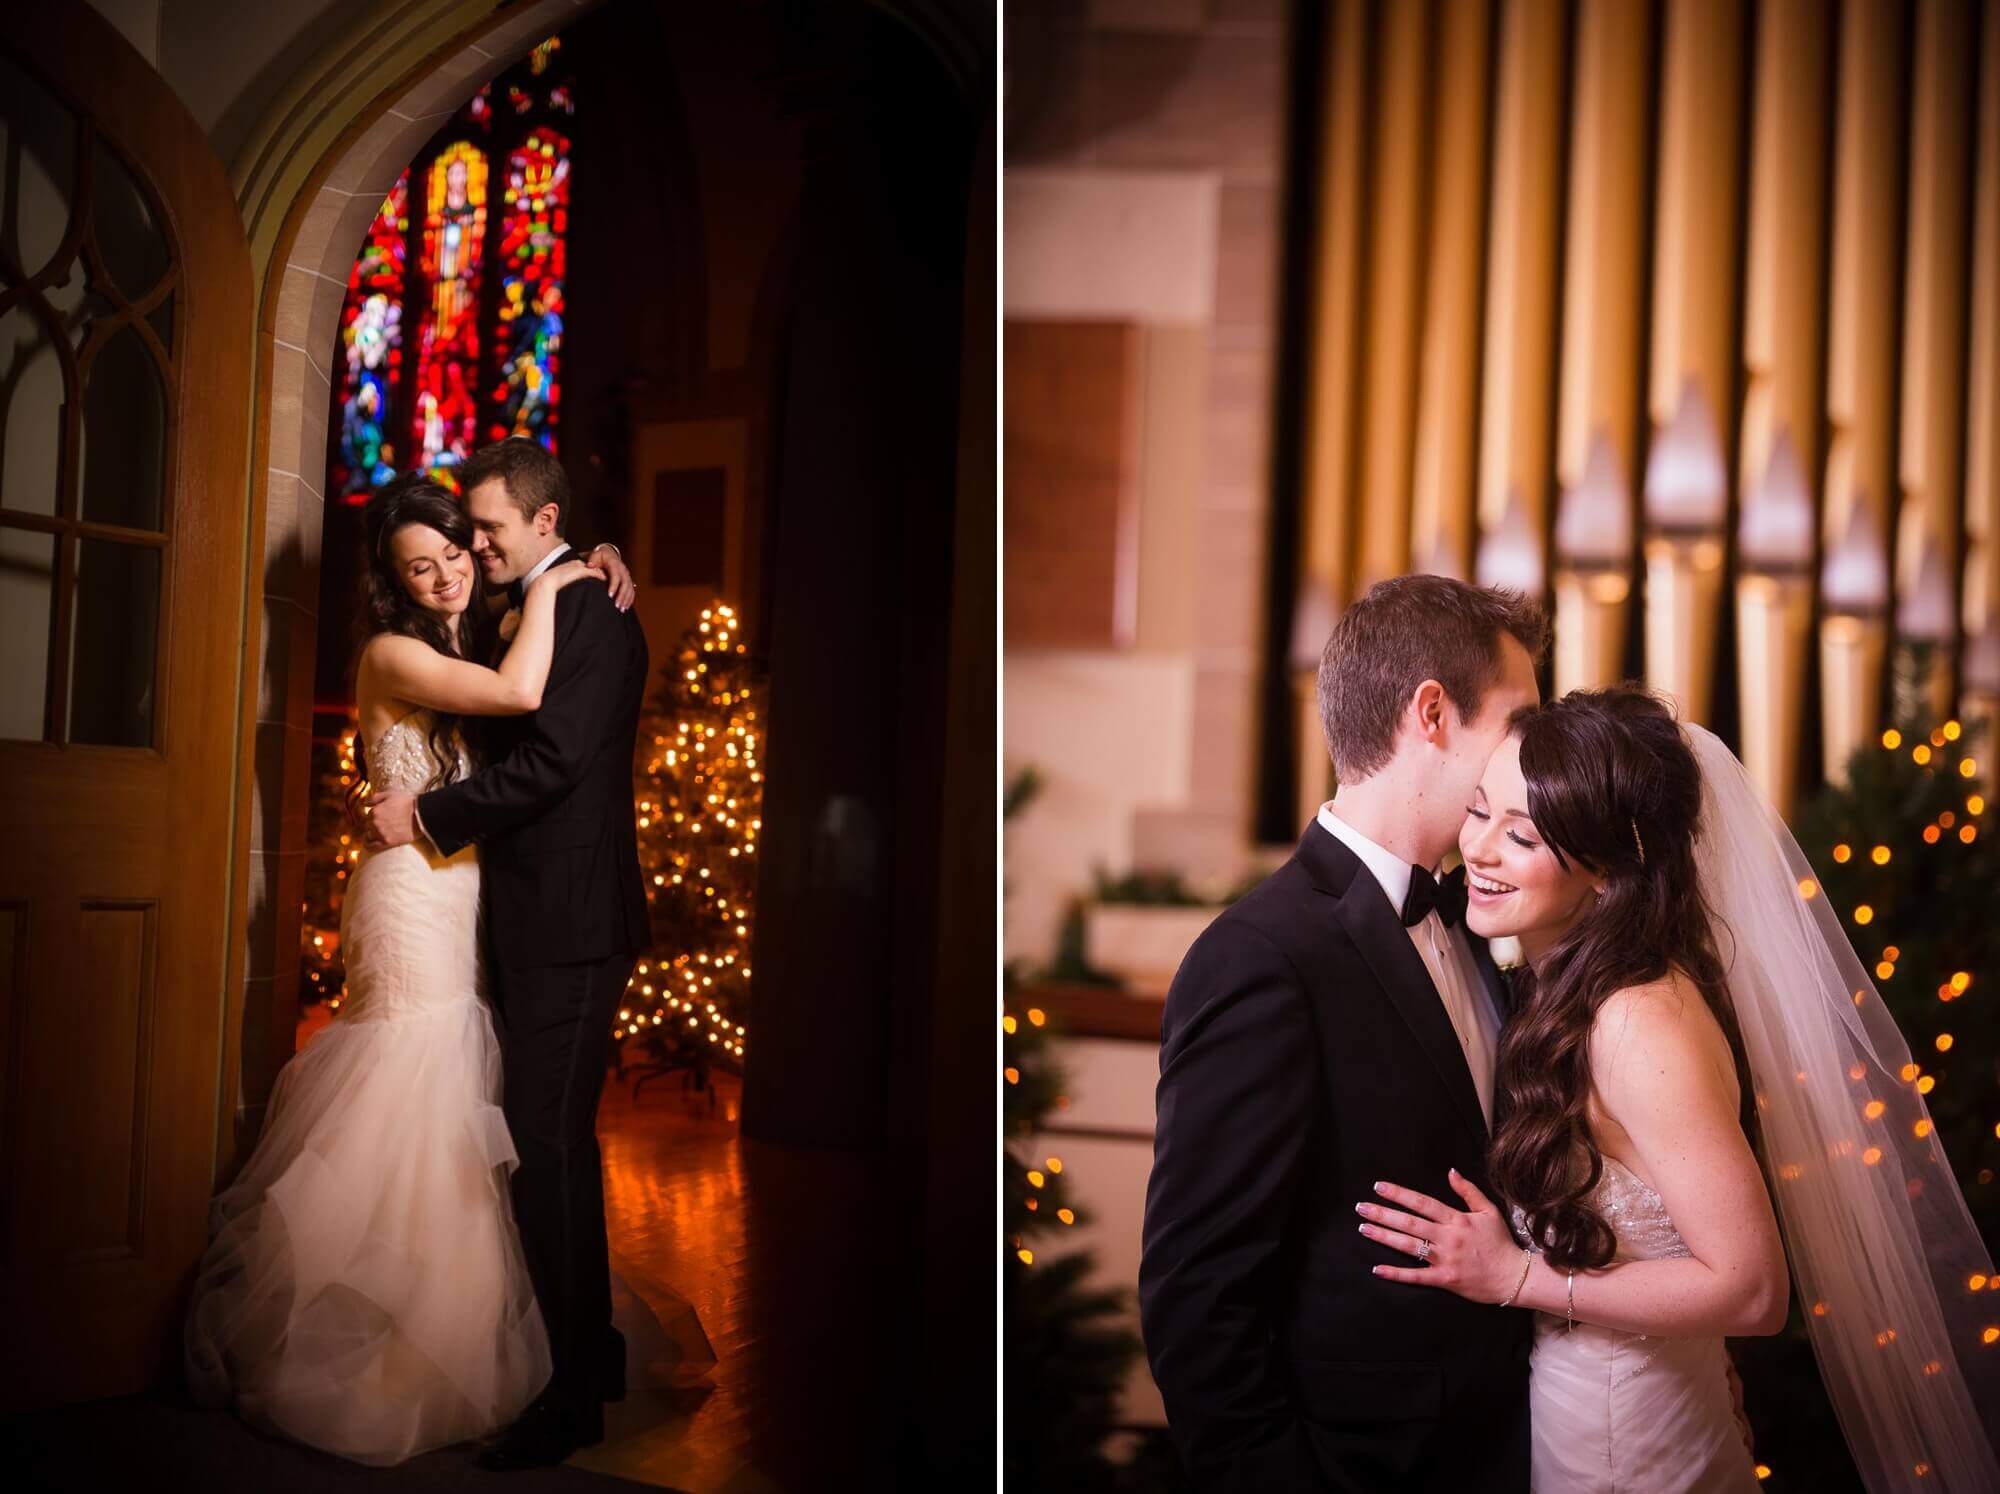 Portraits of the bride and groom illuminated by the Rosedale United Church Christmas decorations